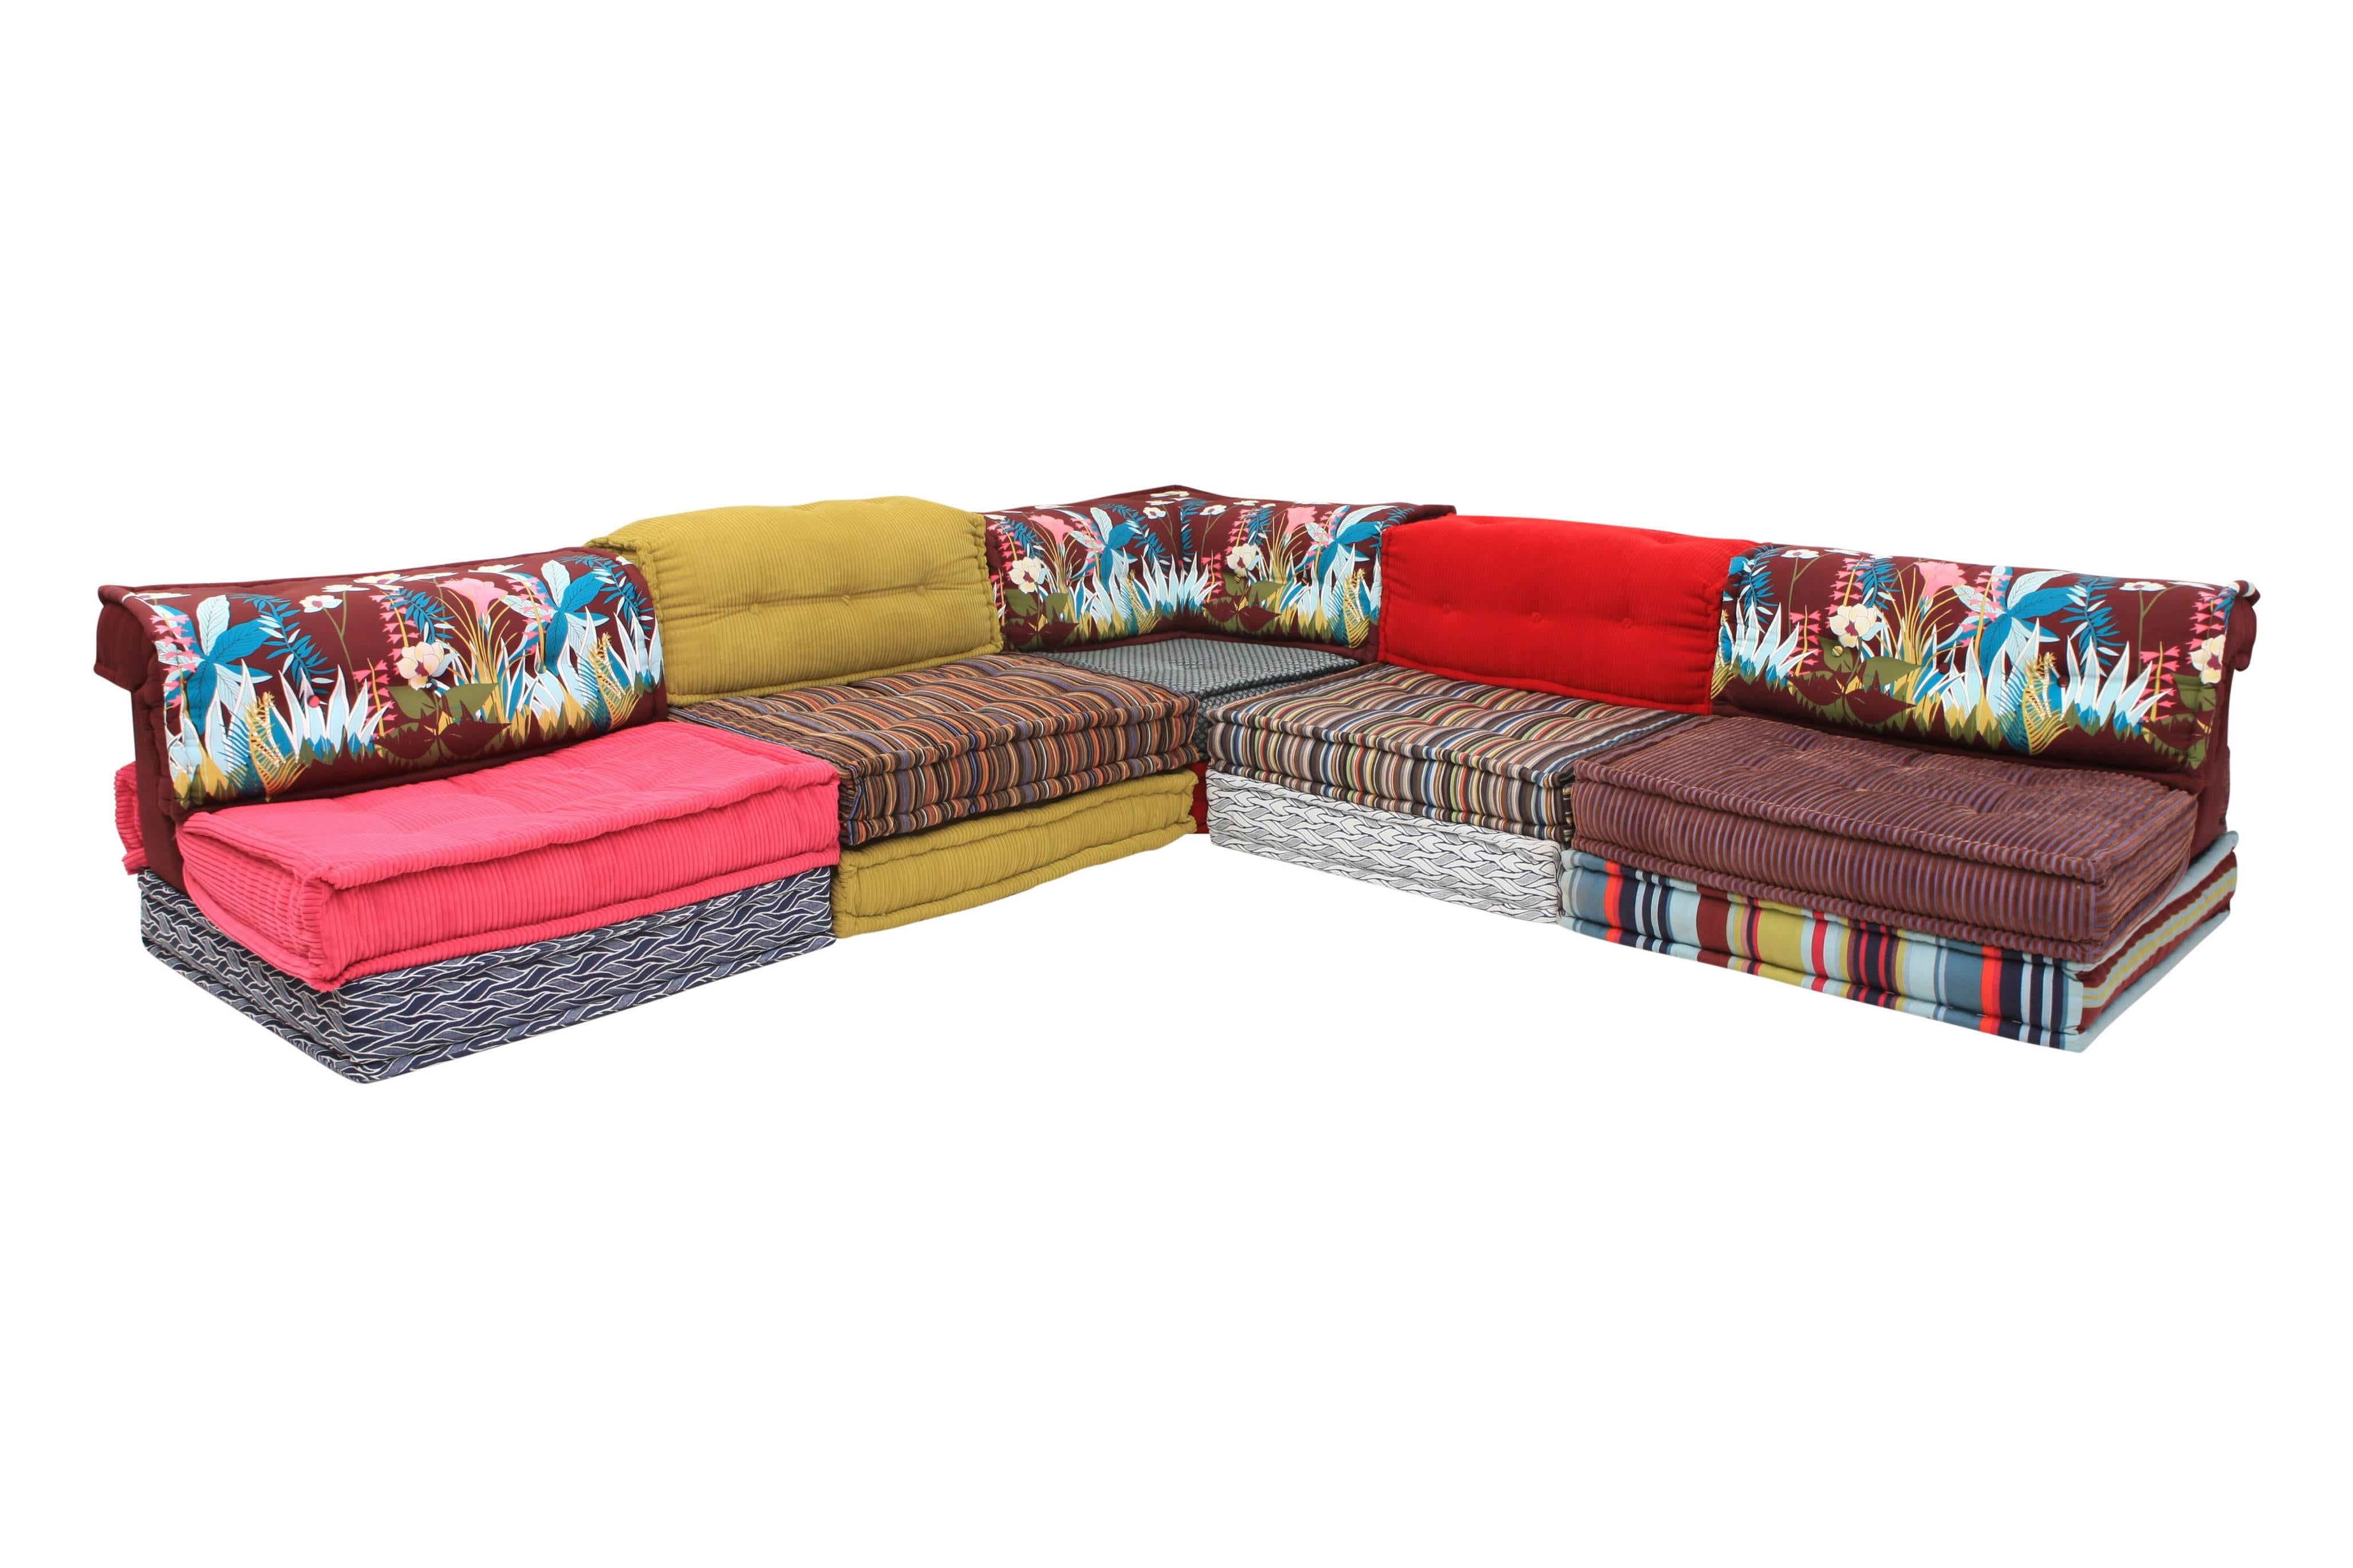 Mah Jong sofa consisting of consisting of 10 seating elements, three regular back cushions, one corner back cushion and 1 adjustable back cushion.
Paul Smith; Missoni home

In the 1970s Hans Hopfer created the Mah Jong lounge sofa, Roche Bobois’s